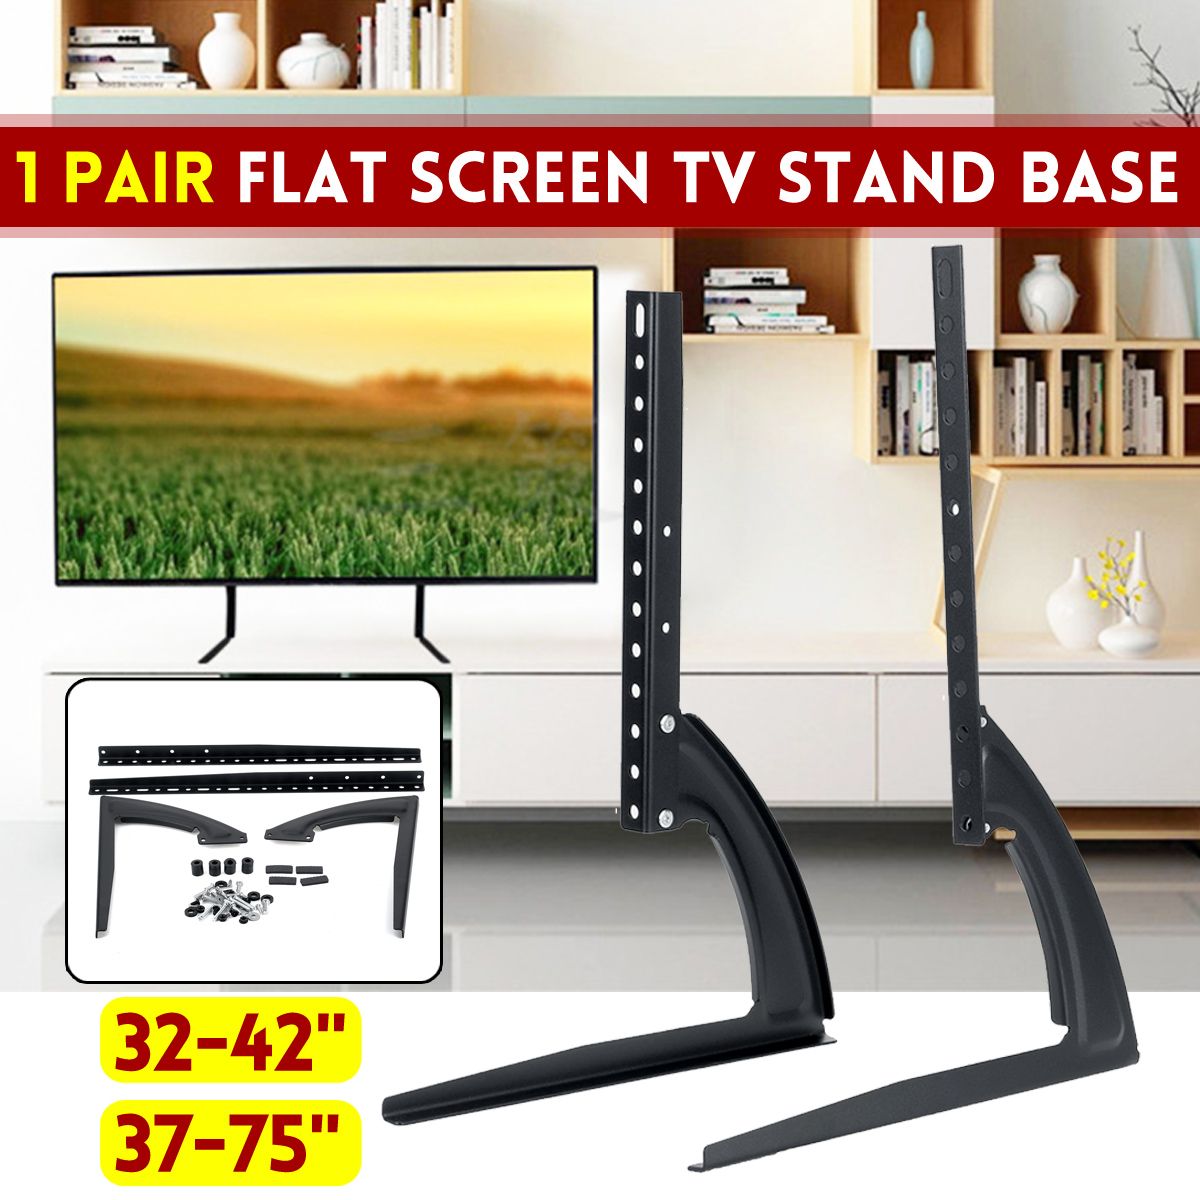 Universal-Table-Top-TV-Stand-Bracket-Mount-Television-Base-Holder-For-32-75-inch-LCD-Flat-Screen-Hei-1749871